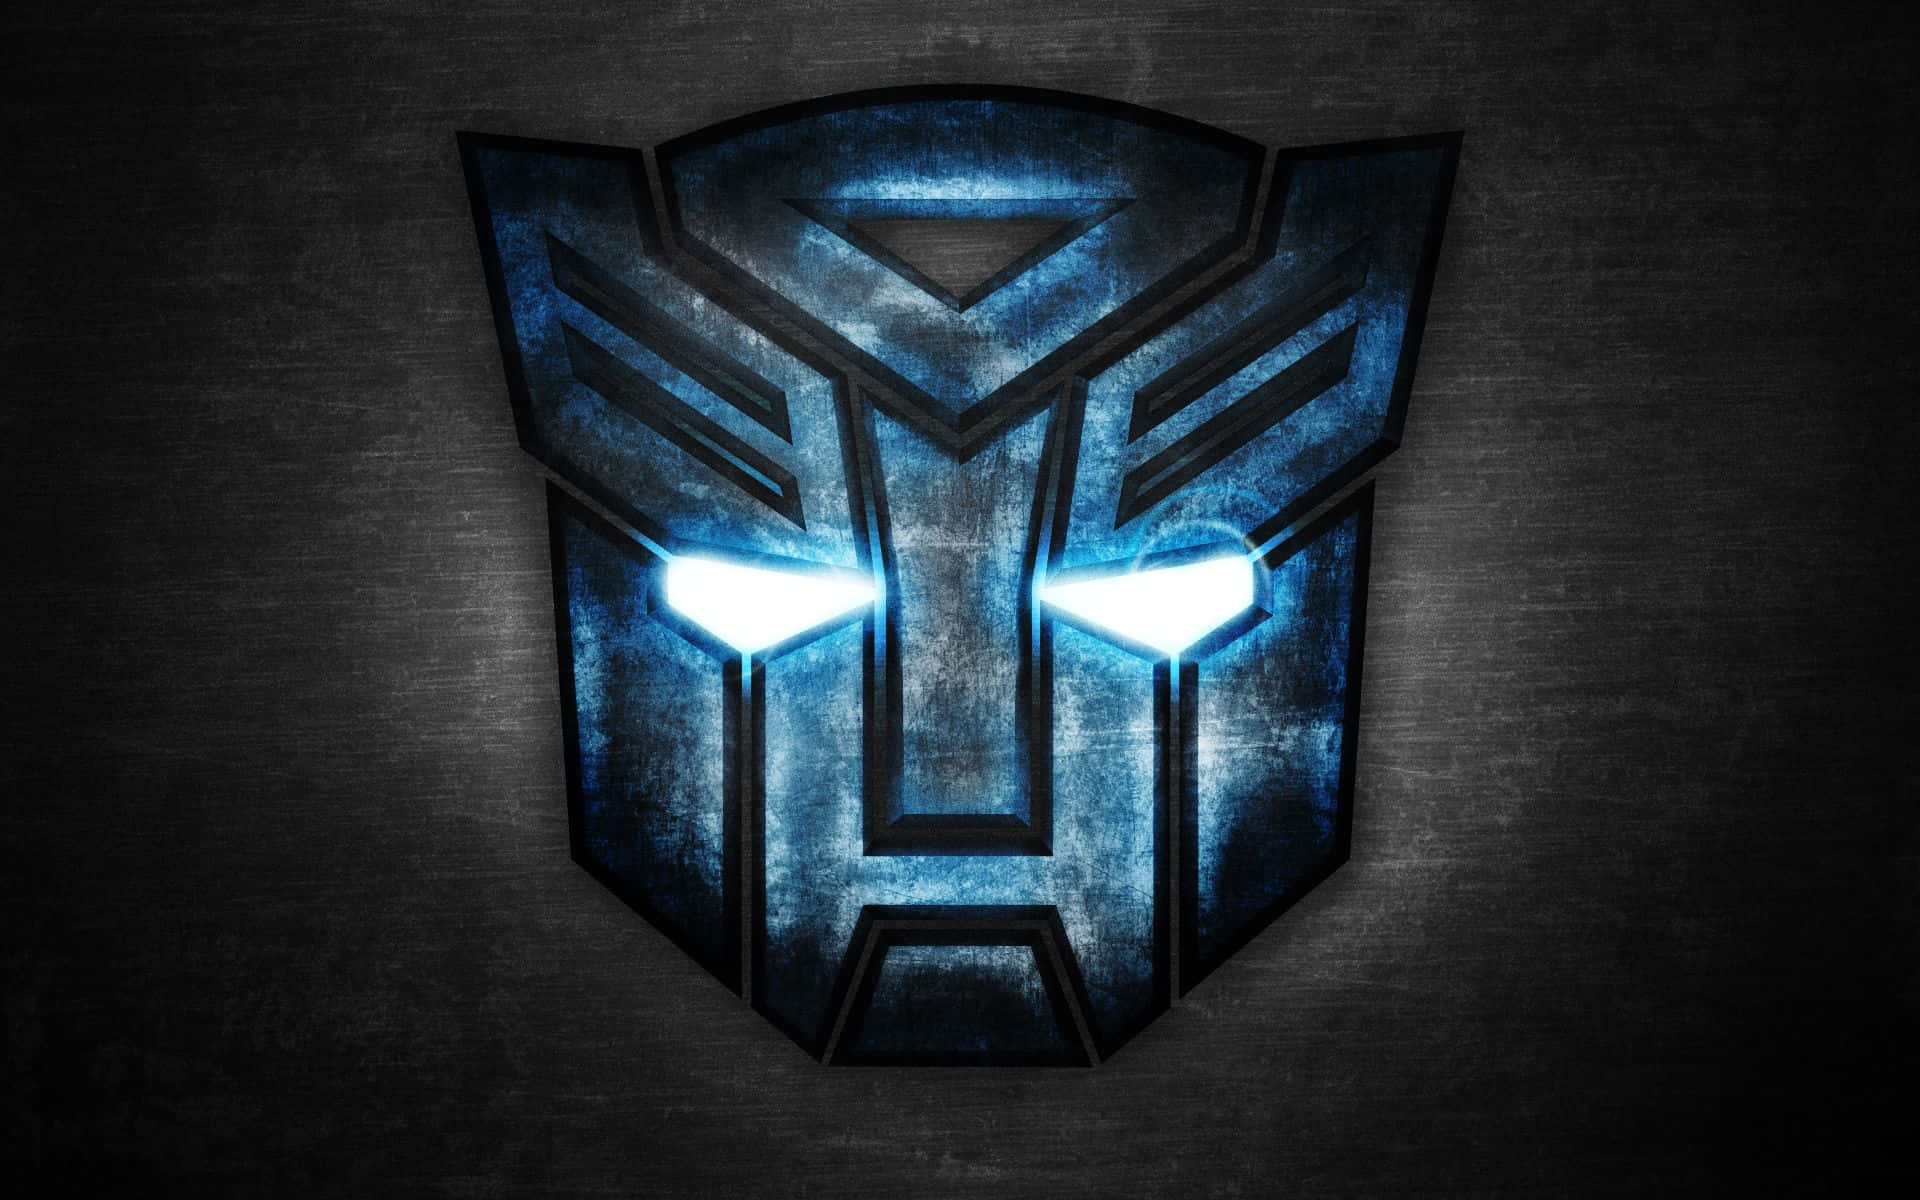 The Autobots - Ready to Save Humanity